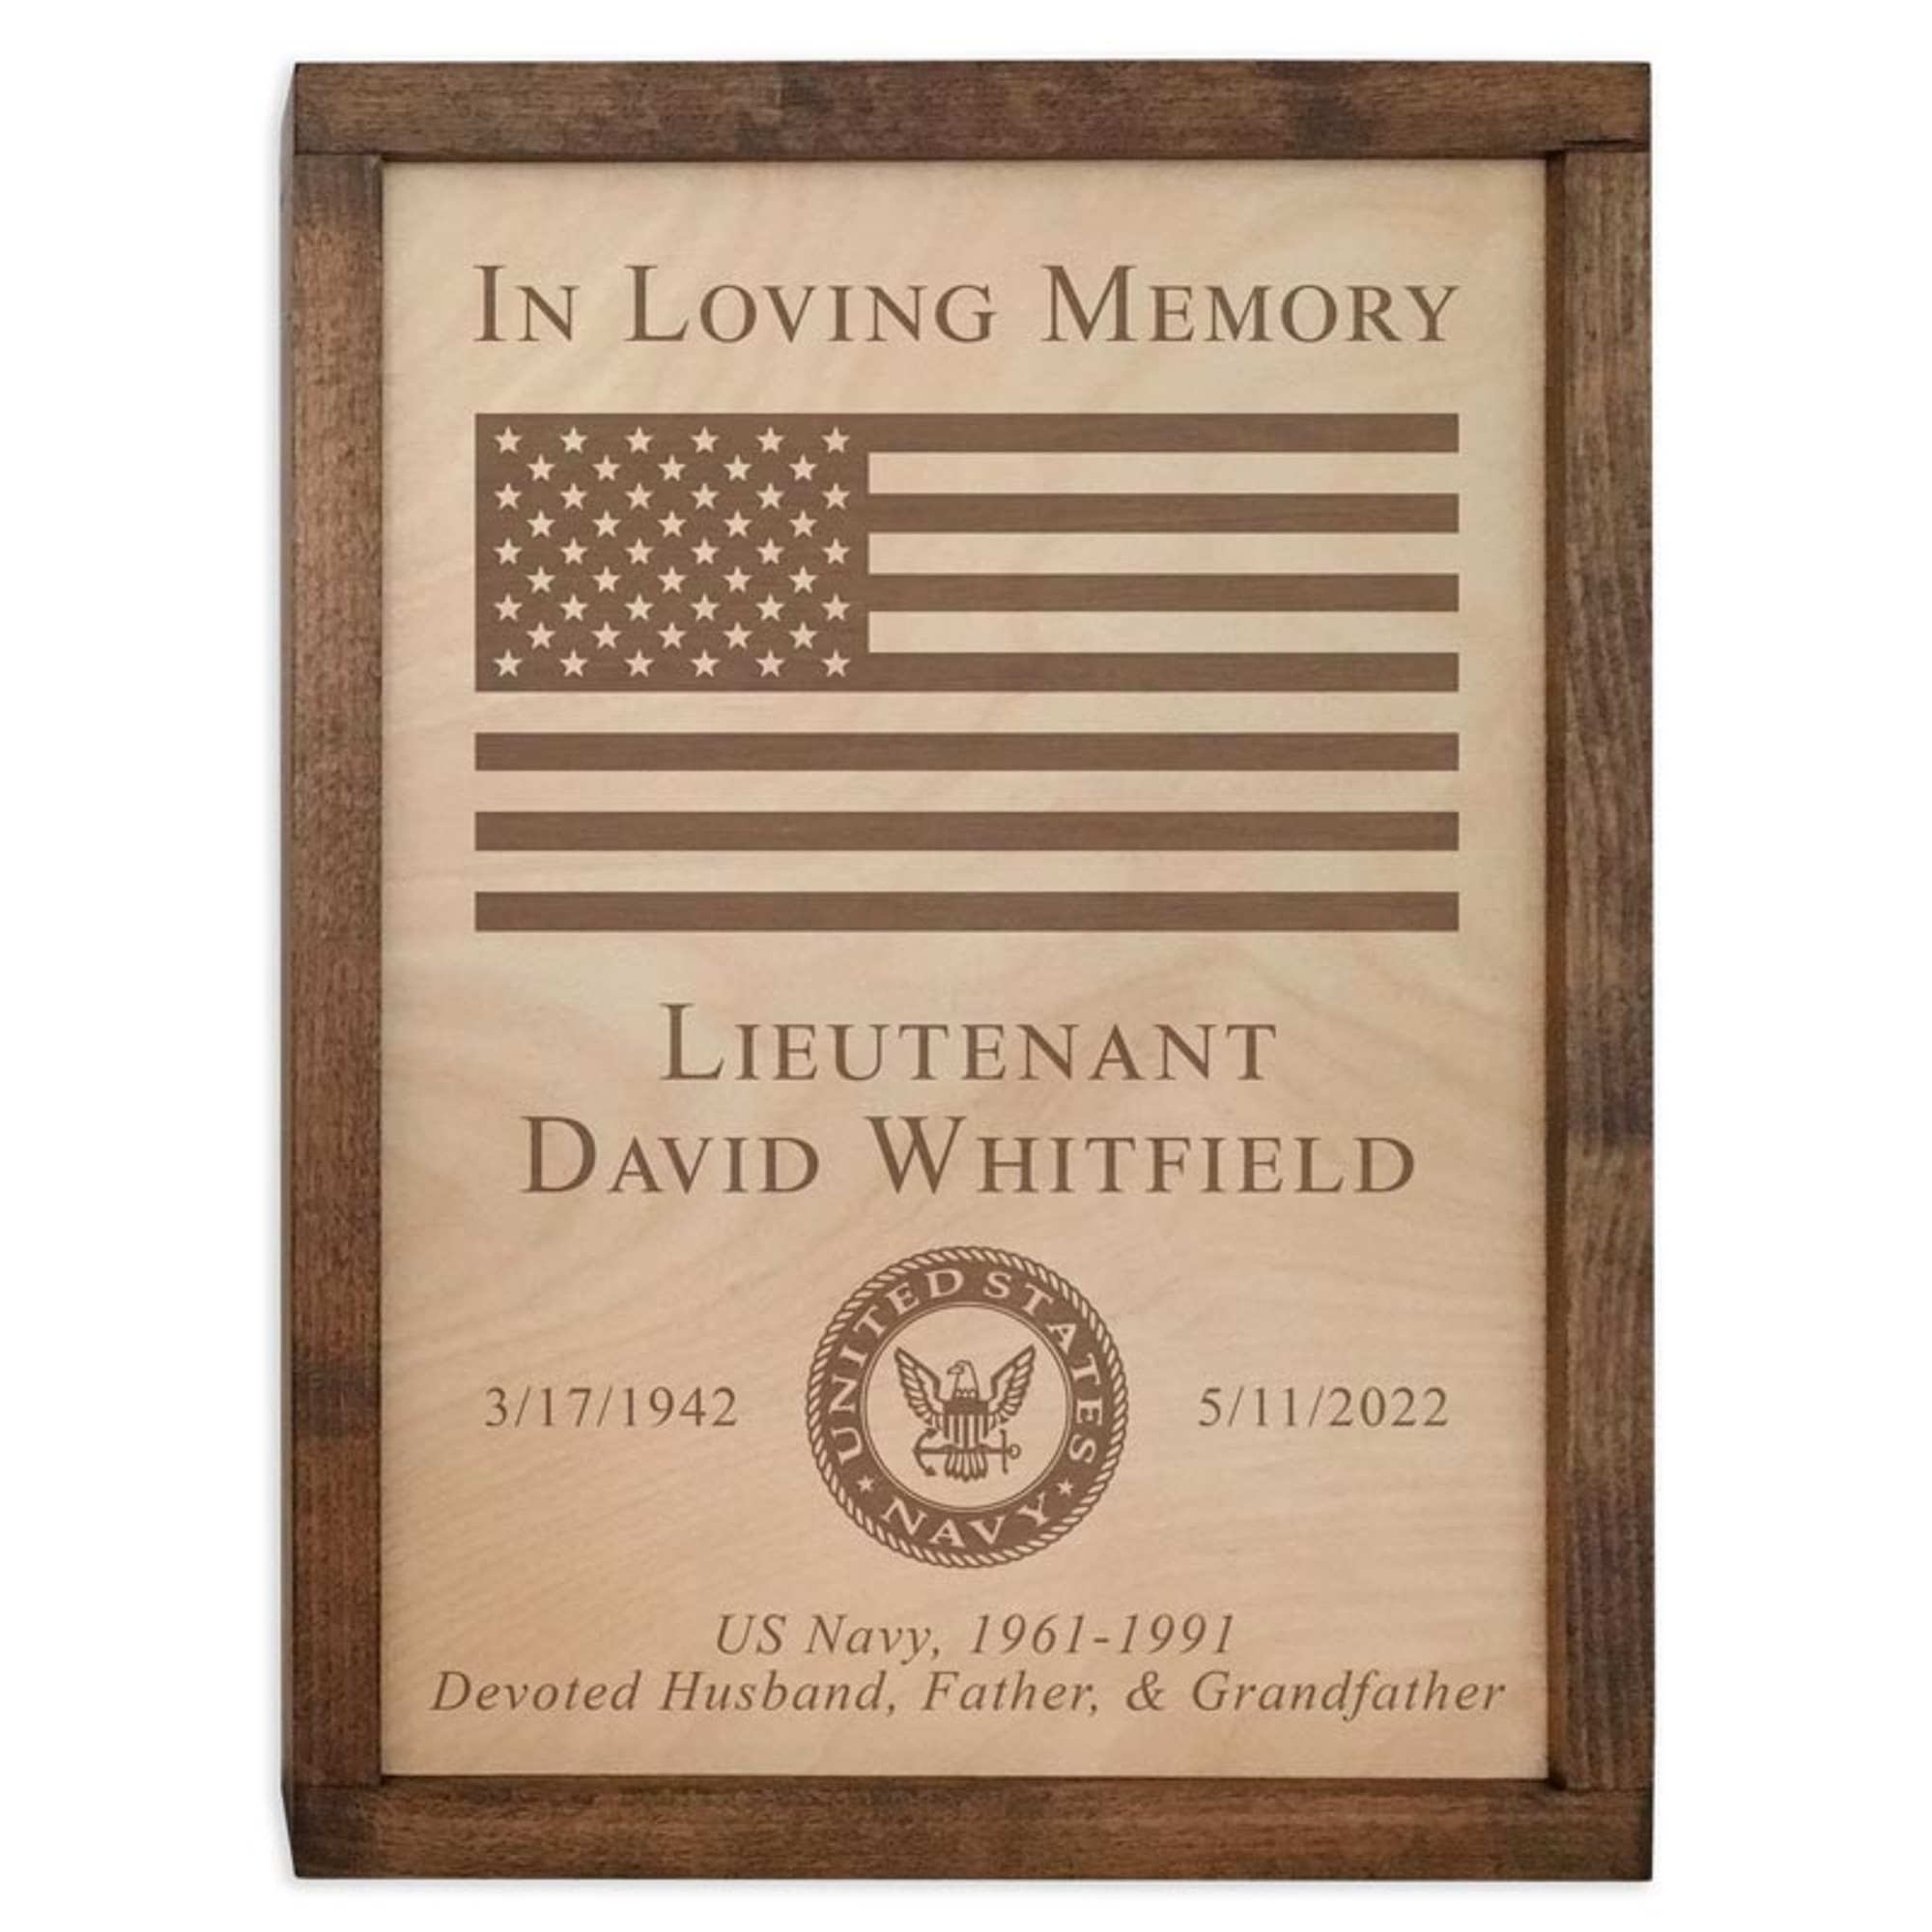 https://cdn11.bigcommerce.com/s-40f15/images/stencil/2000x2000/products/1787/10193/military-memorial-plaque-cremation-urn-flag-navy__62619.1654015470.jpg?c=2